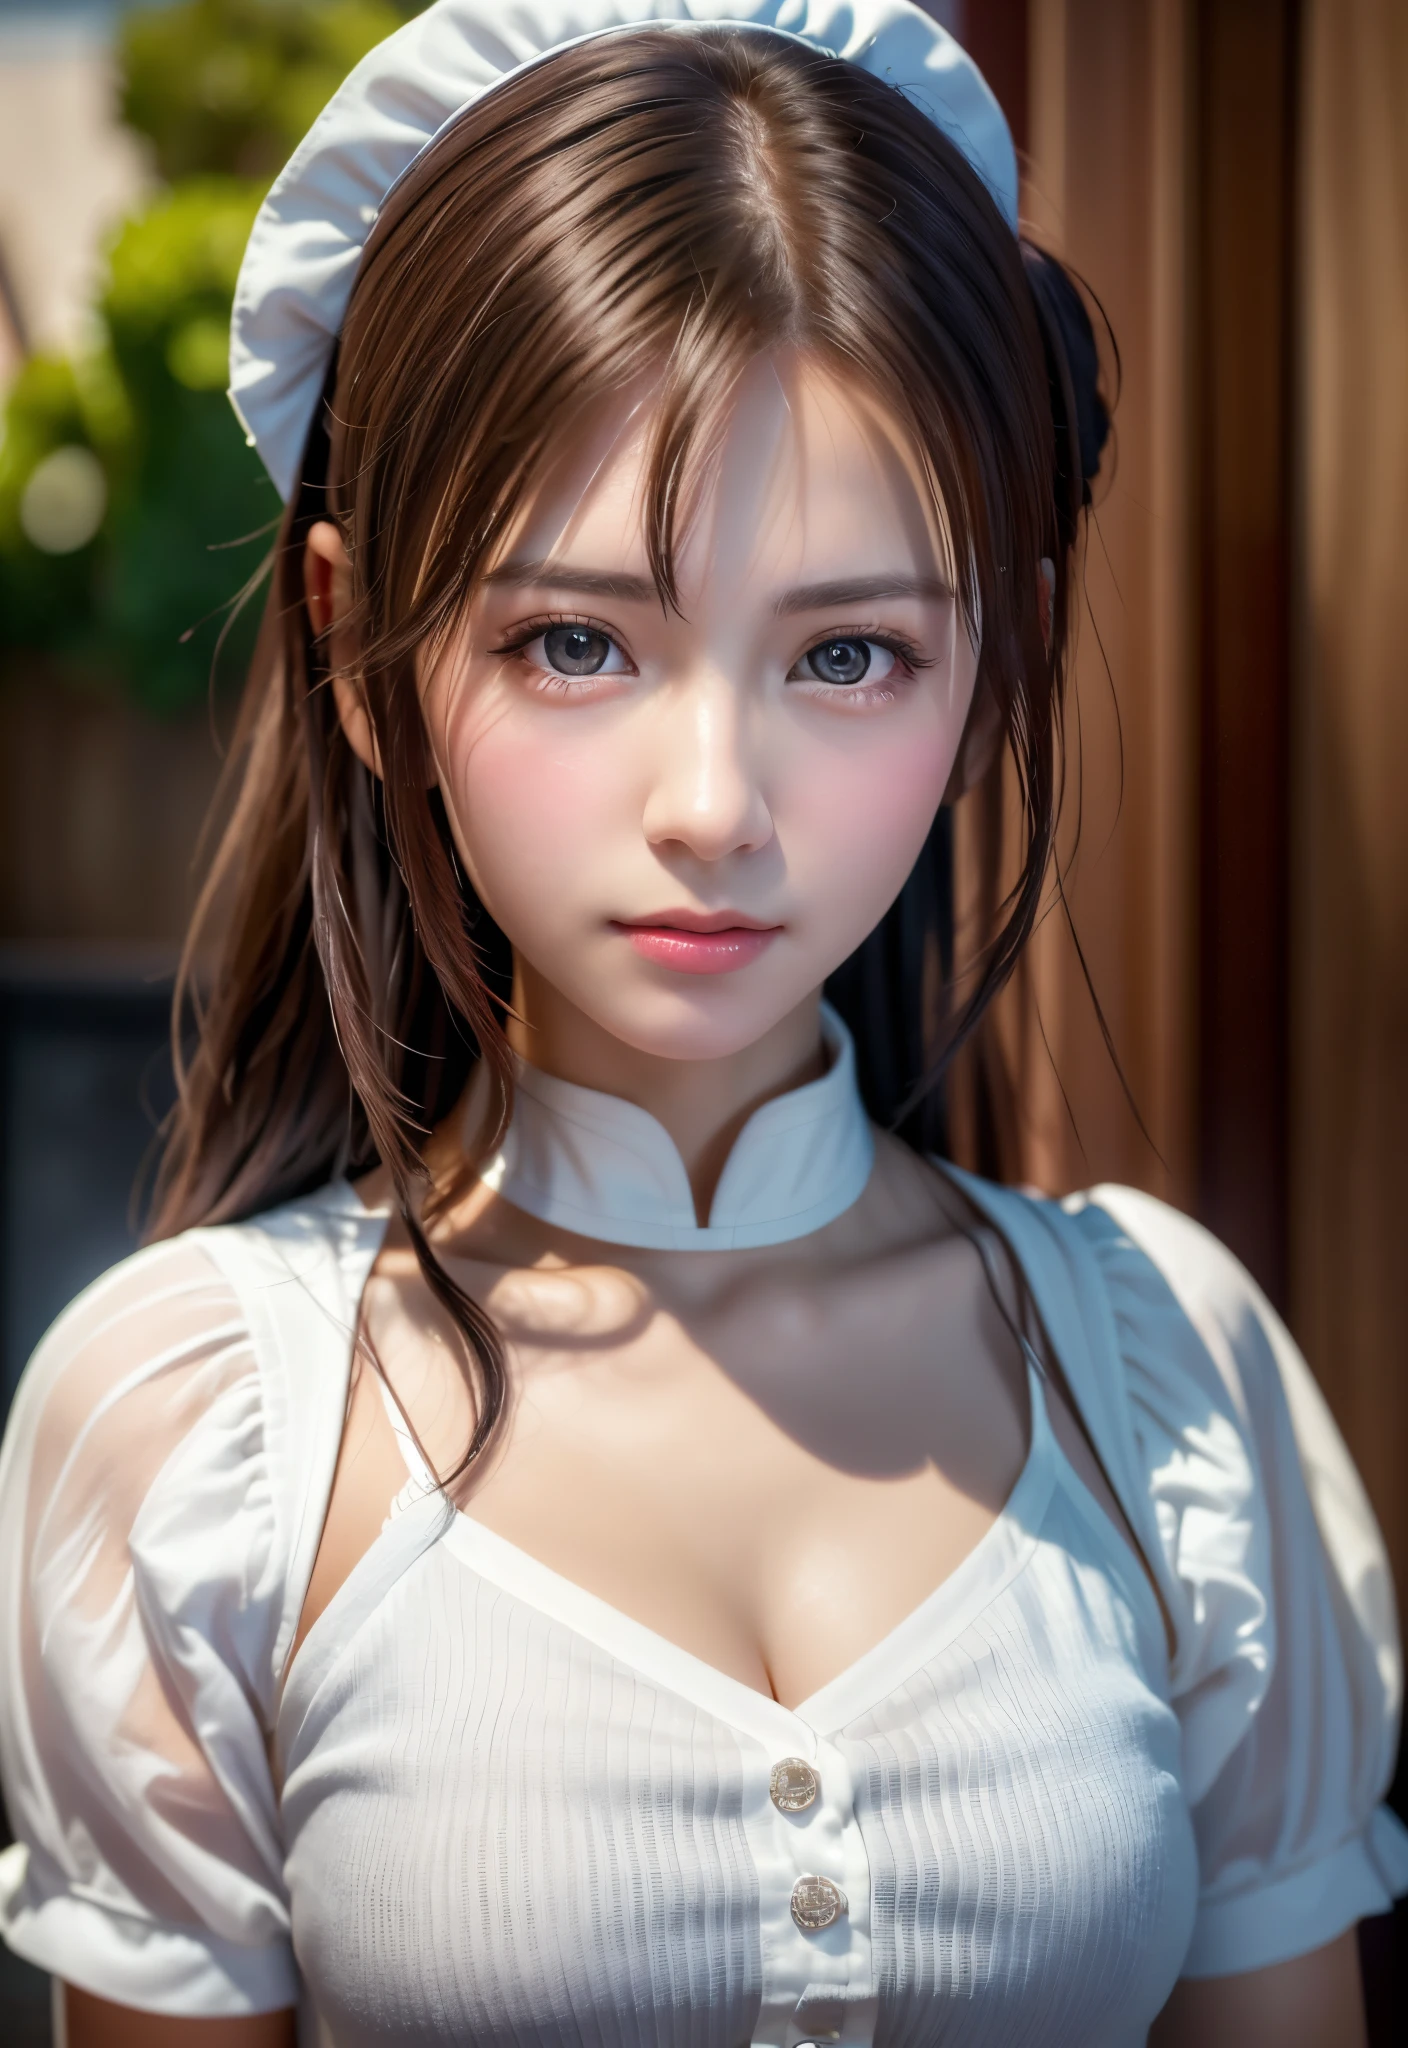 8K, of the highest quality, masutepiece:1.2), (Realistic, Photorealsitic:1.37), of the highest quality, masutepiece, Beautiful young woman, Pensive expression,、A charming、and an inviting look, Cute Maid Clothes, Hair tied back, Cinematic background, Light skin tone